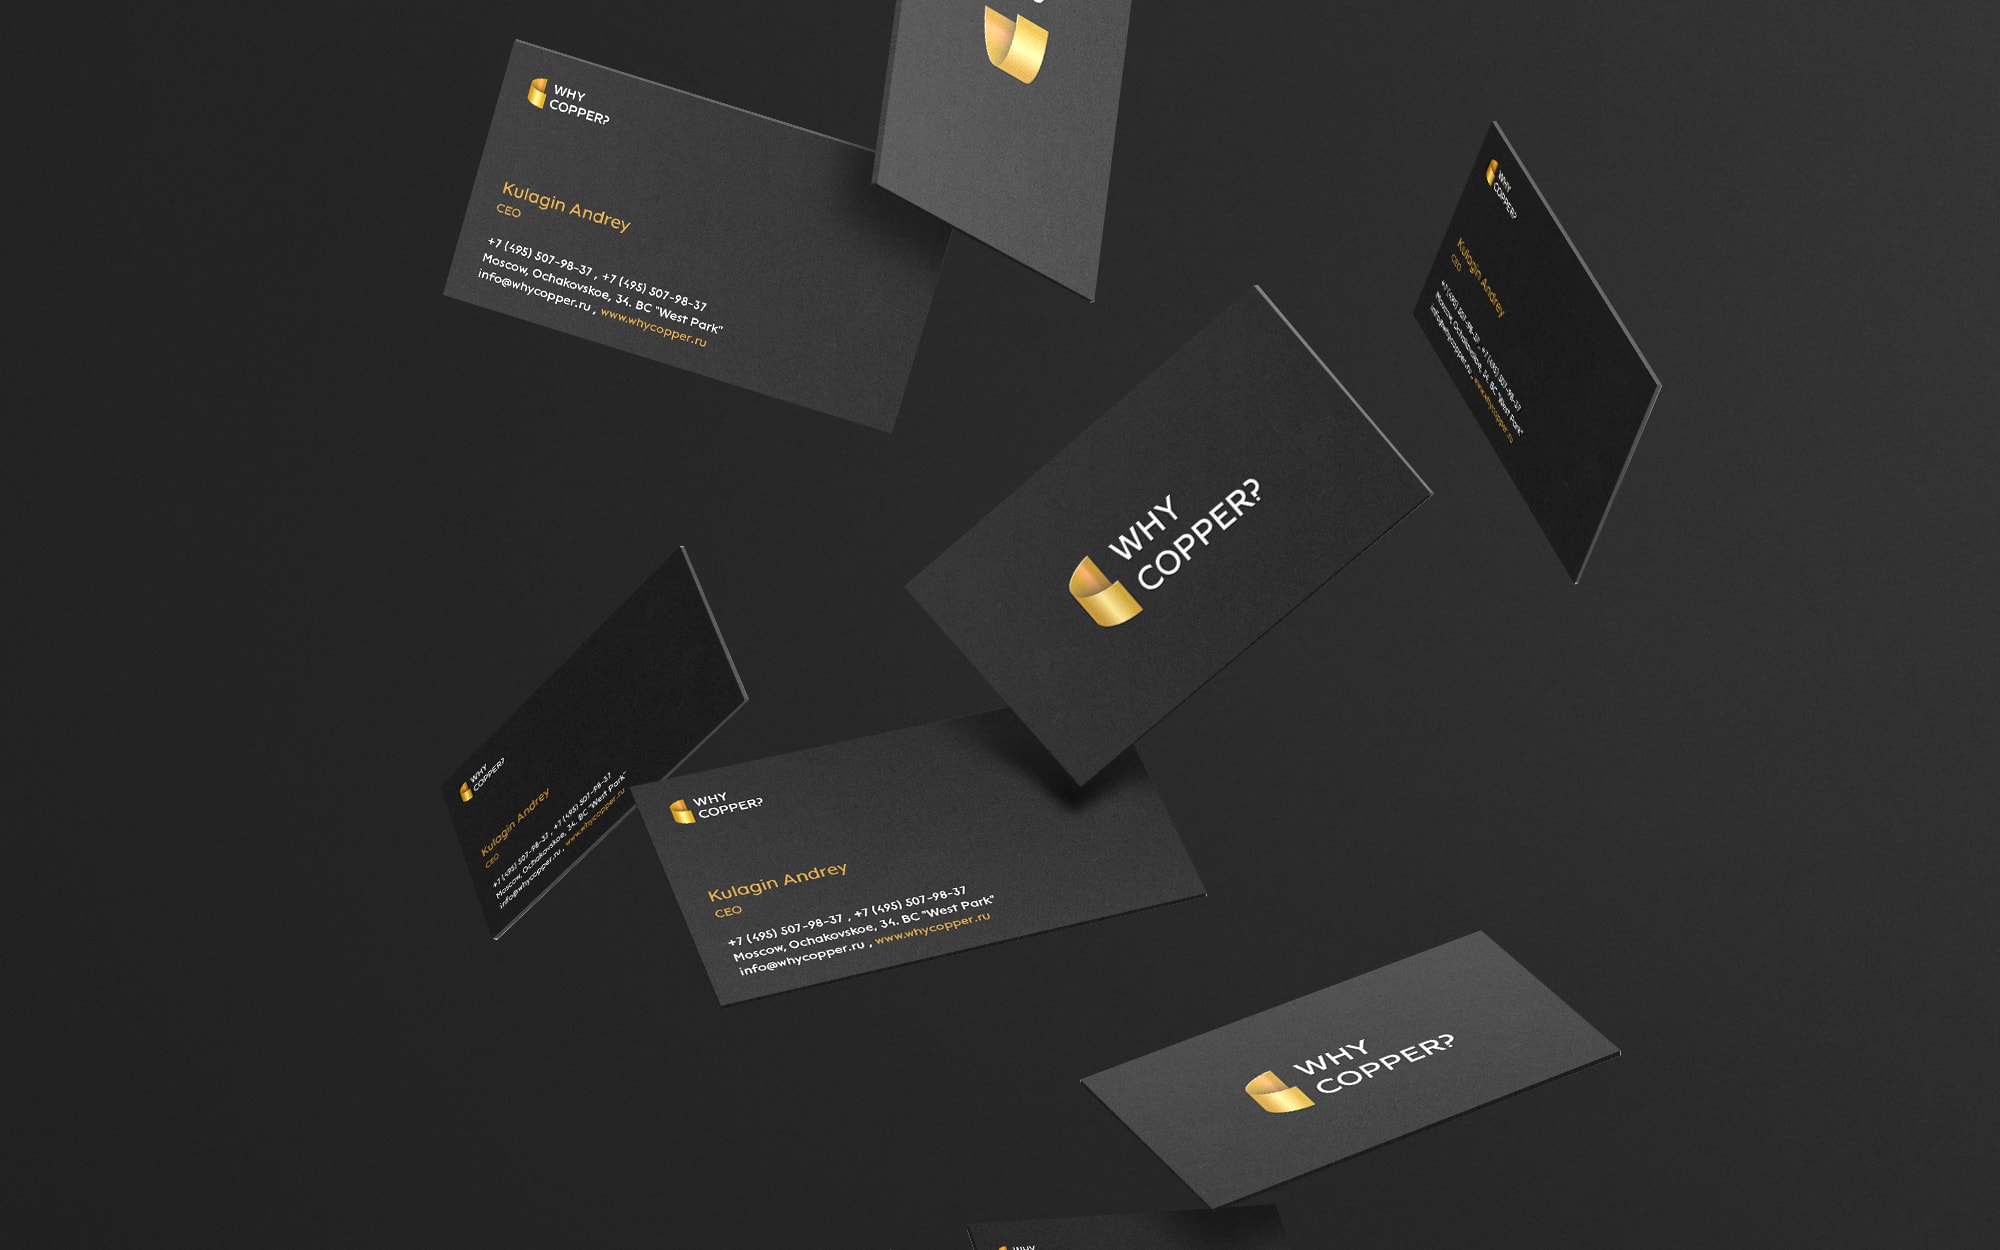 Production company branding and business cards